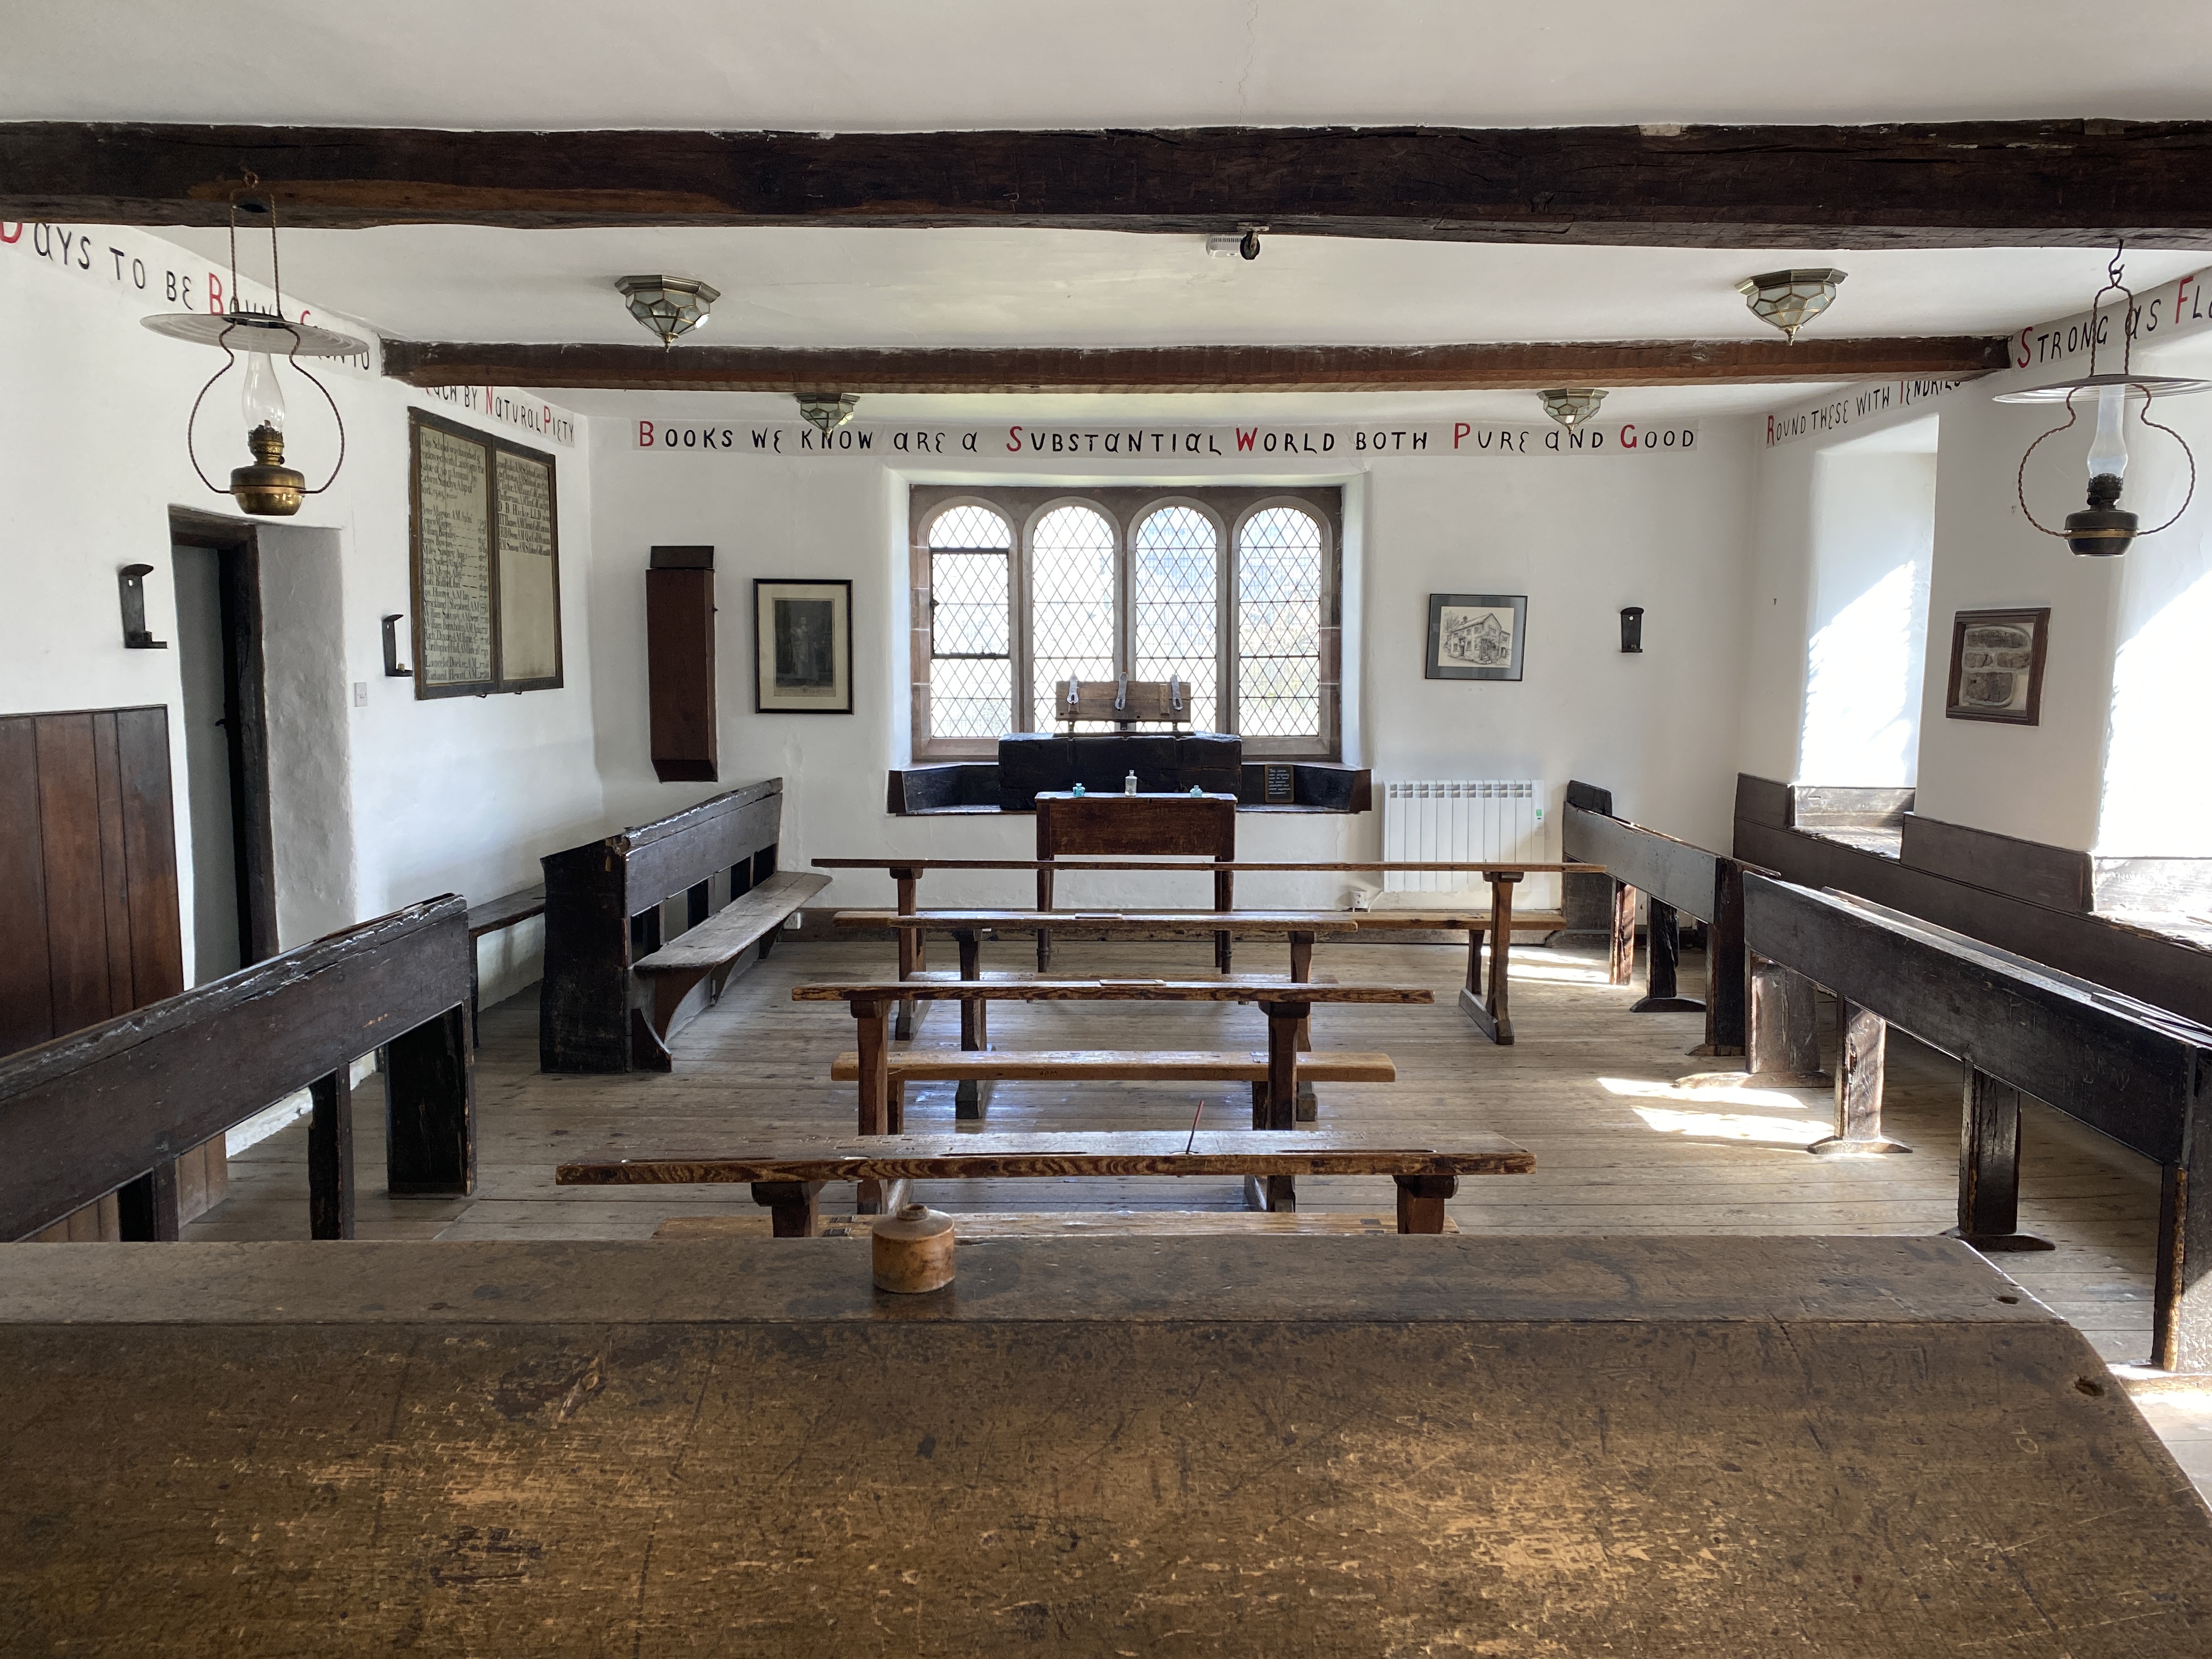 Classroom with historic wooden desks at the sides and in rows through the middle. The room has white walls and wooden beams. 